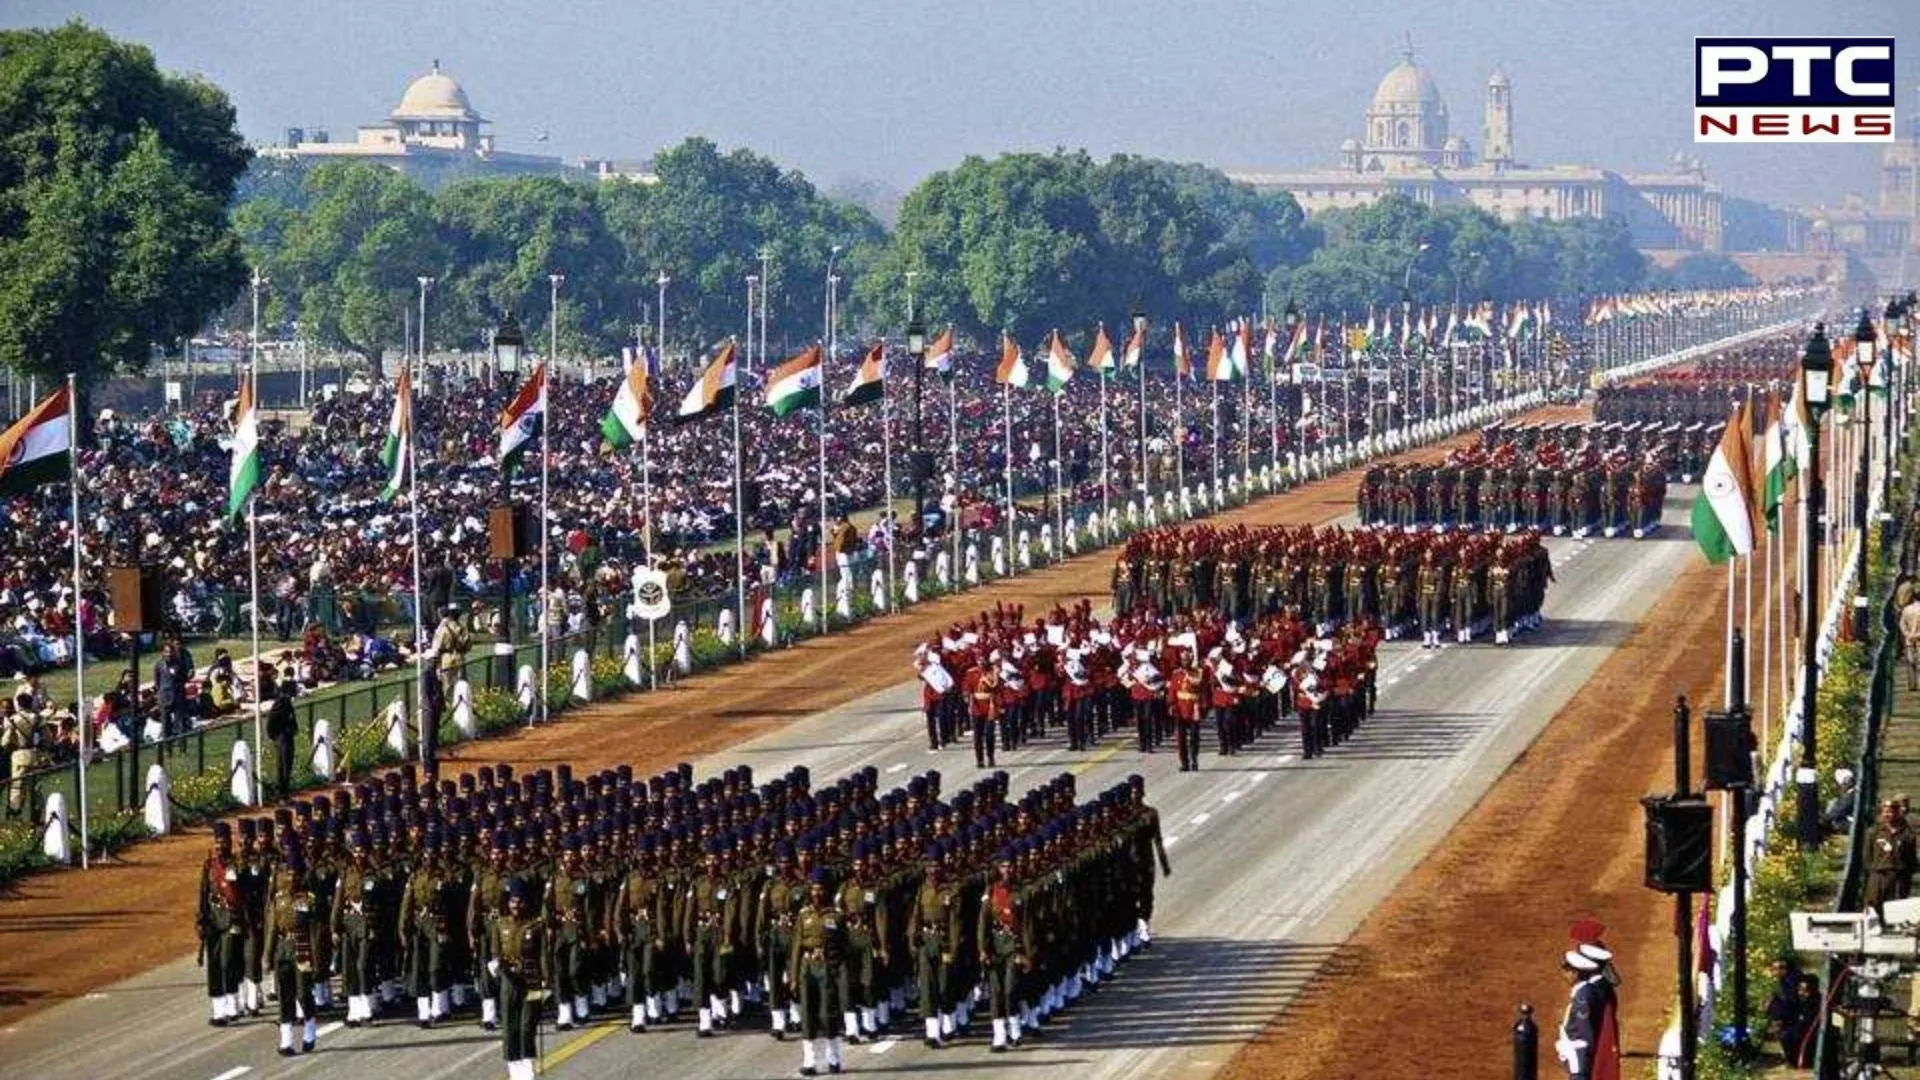 Republic Day quotes and wishes Celebrating unity and freedom